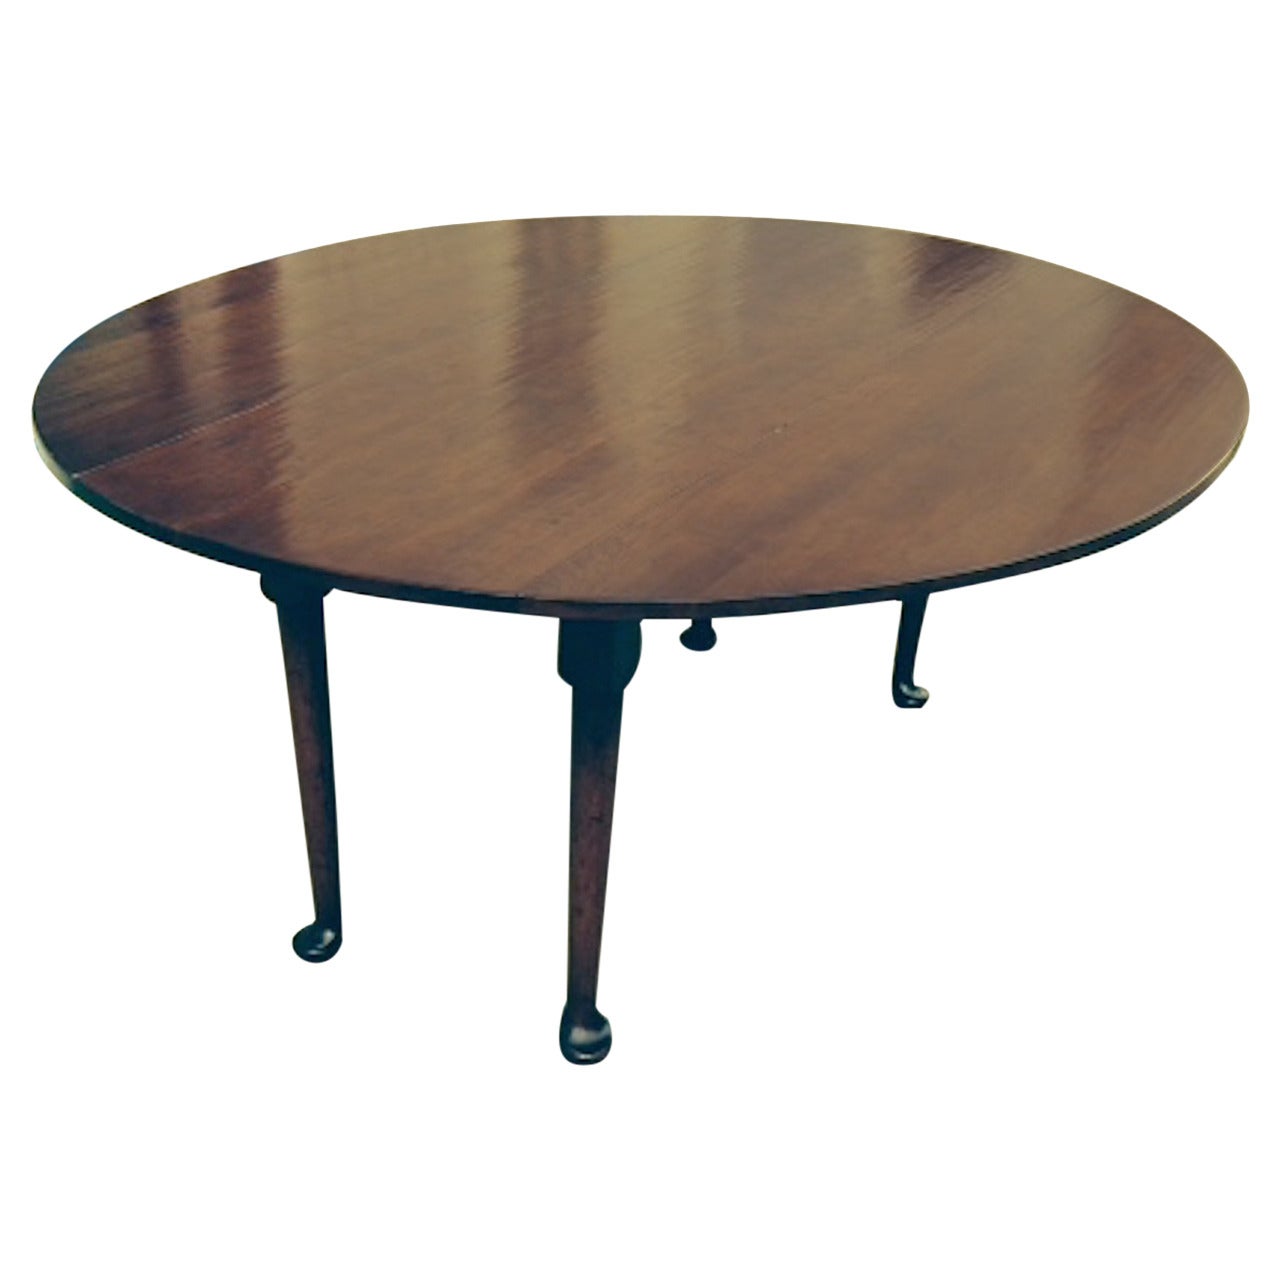 Handcrafted English Mahogany Drop-Leaf Table